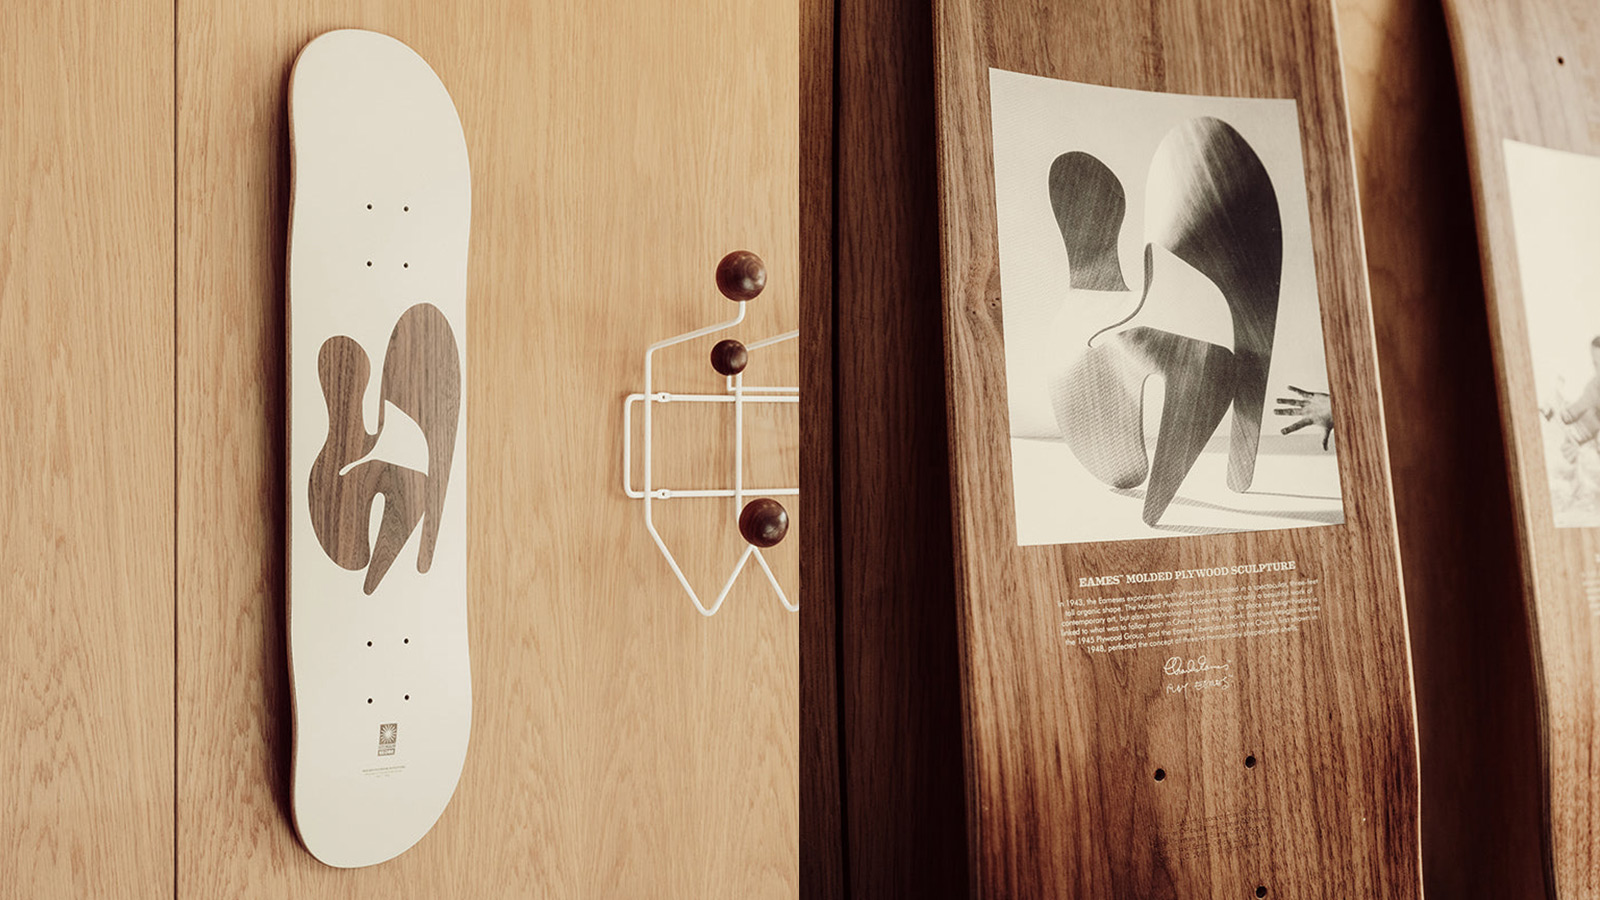 Eames Silhouette 8 Deck - Plywood Sculpture